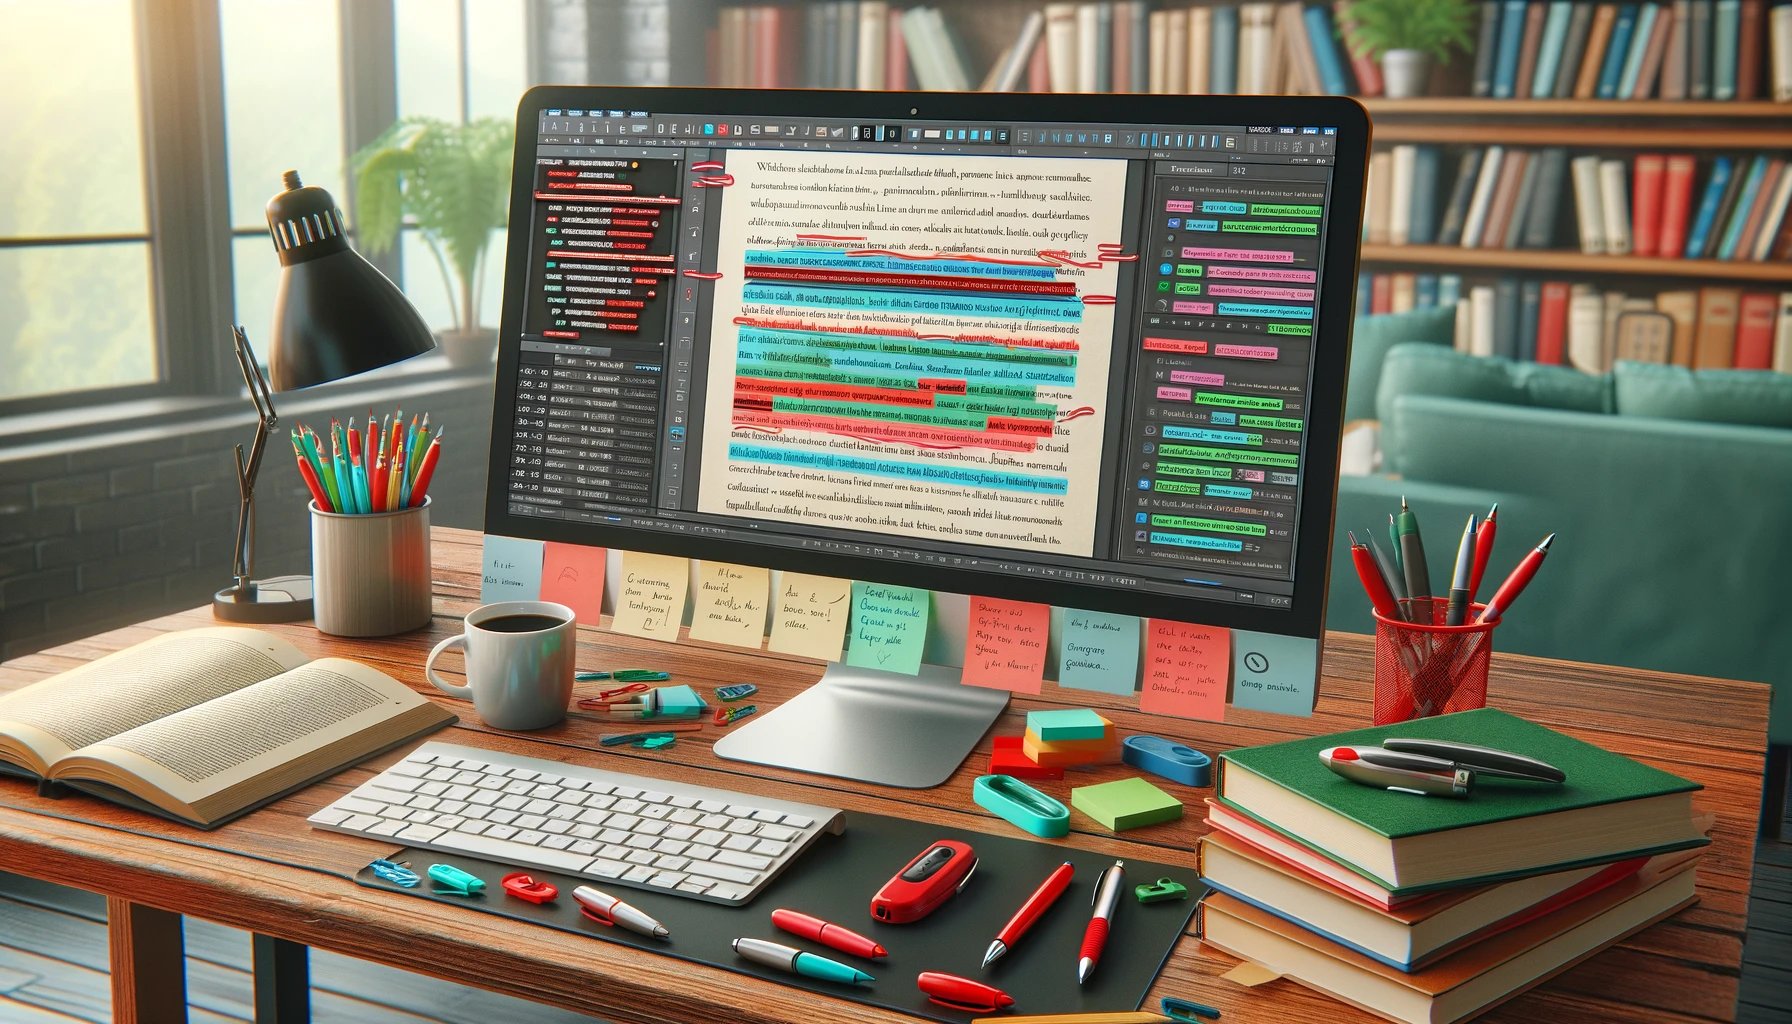 An image representing grammar and corrections. The scene includes a computer screen displaying a document with highlighted text, tracked changes, and 